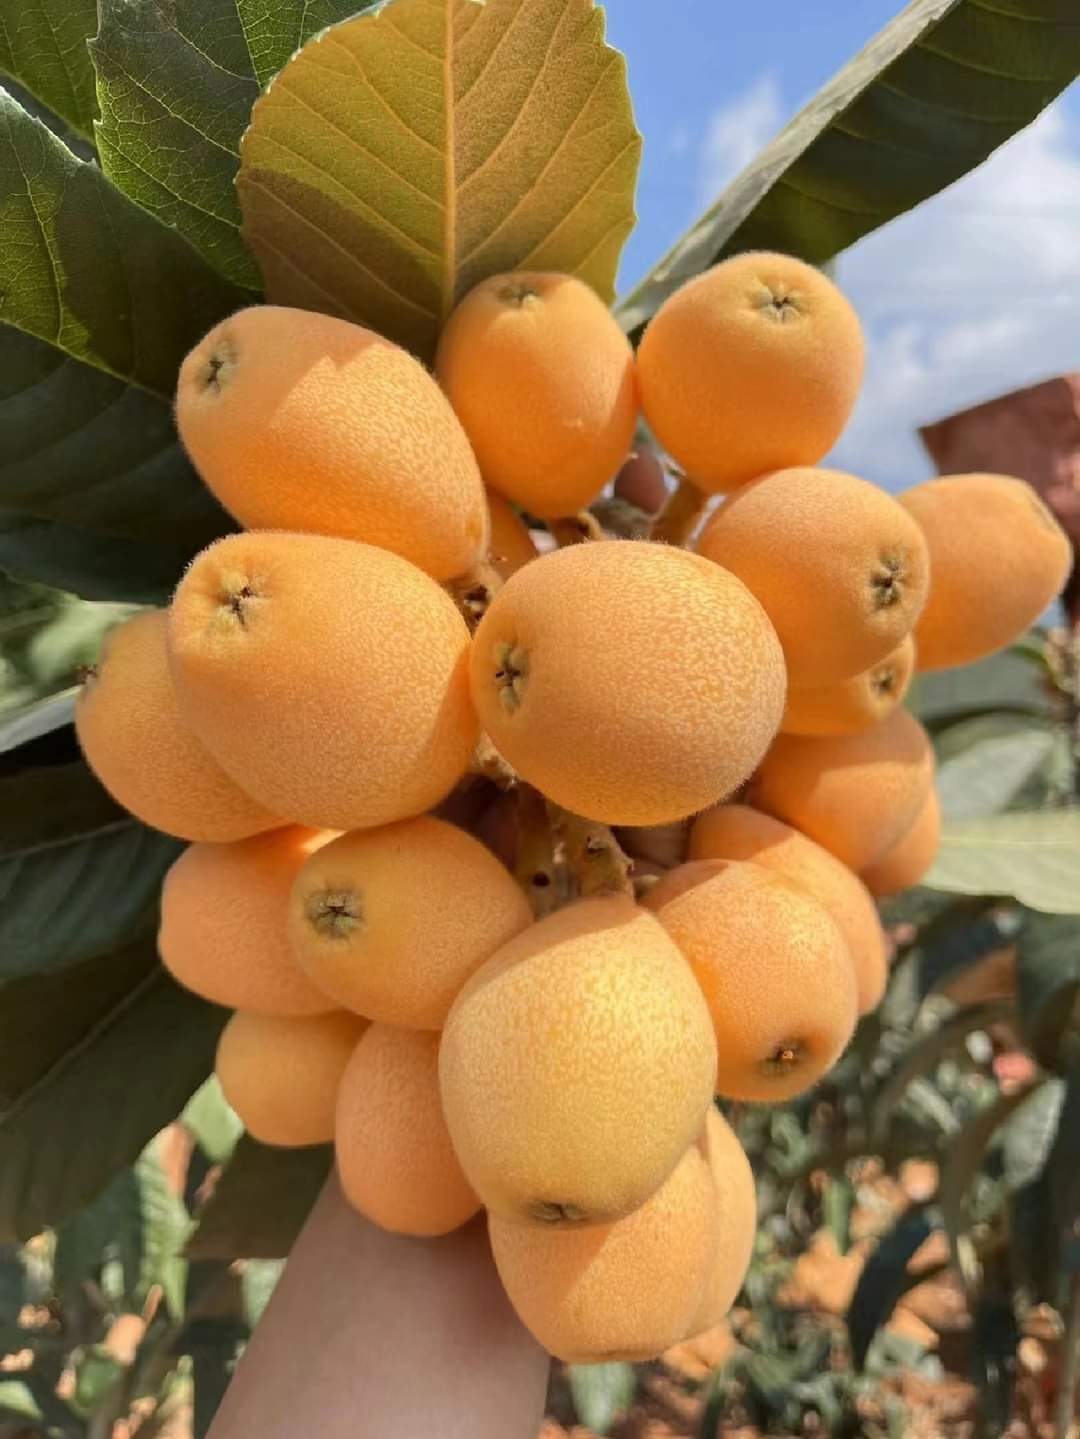 EXTENSIVE GUIDE ON GROWING LOQUATS, GROWING AREAS, CONDITIONS, PEST AND DISEASES